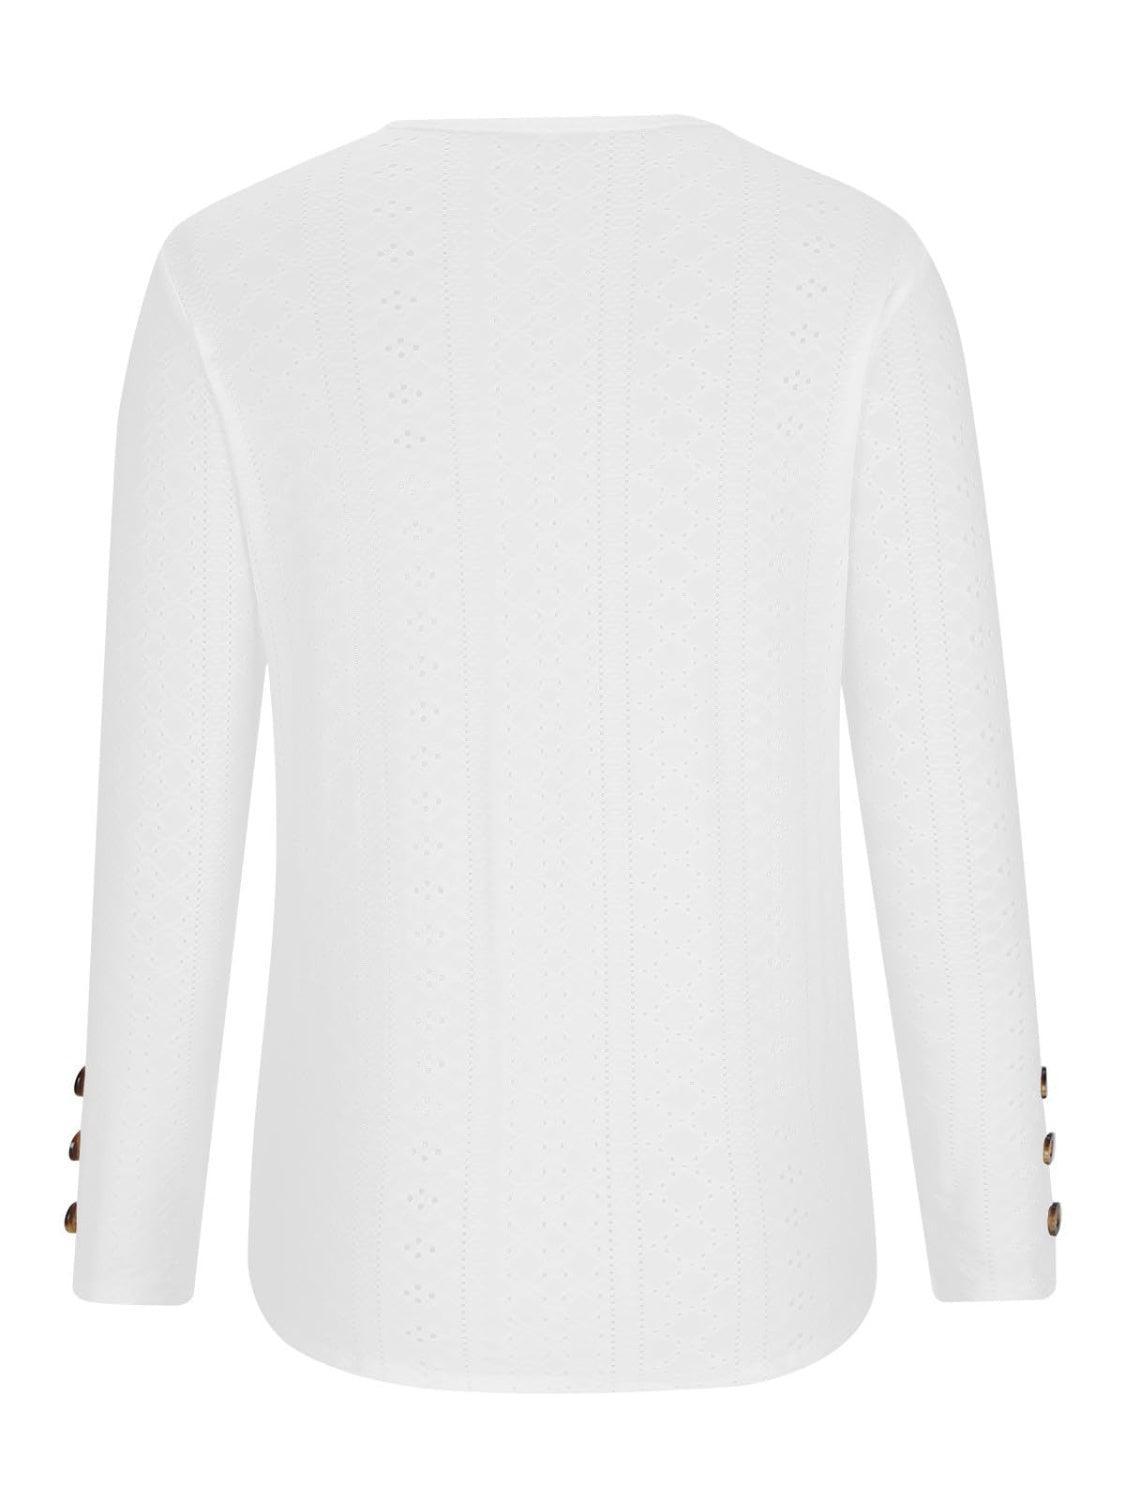 a white sweater with buttons on the sleeves